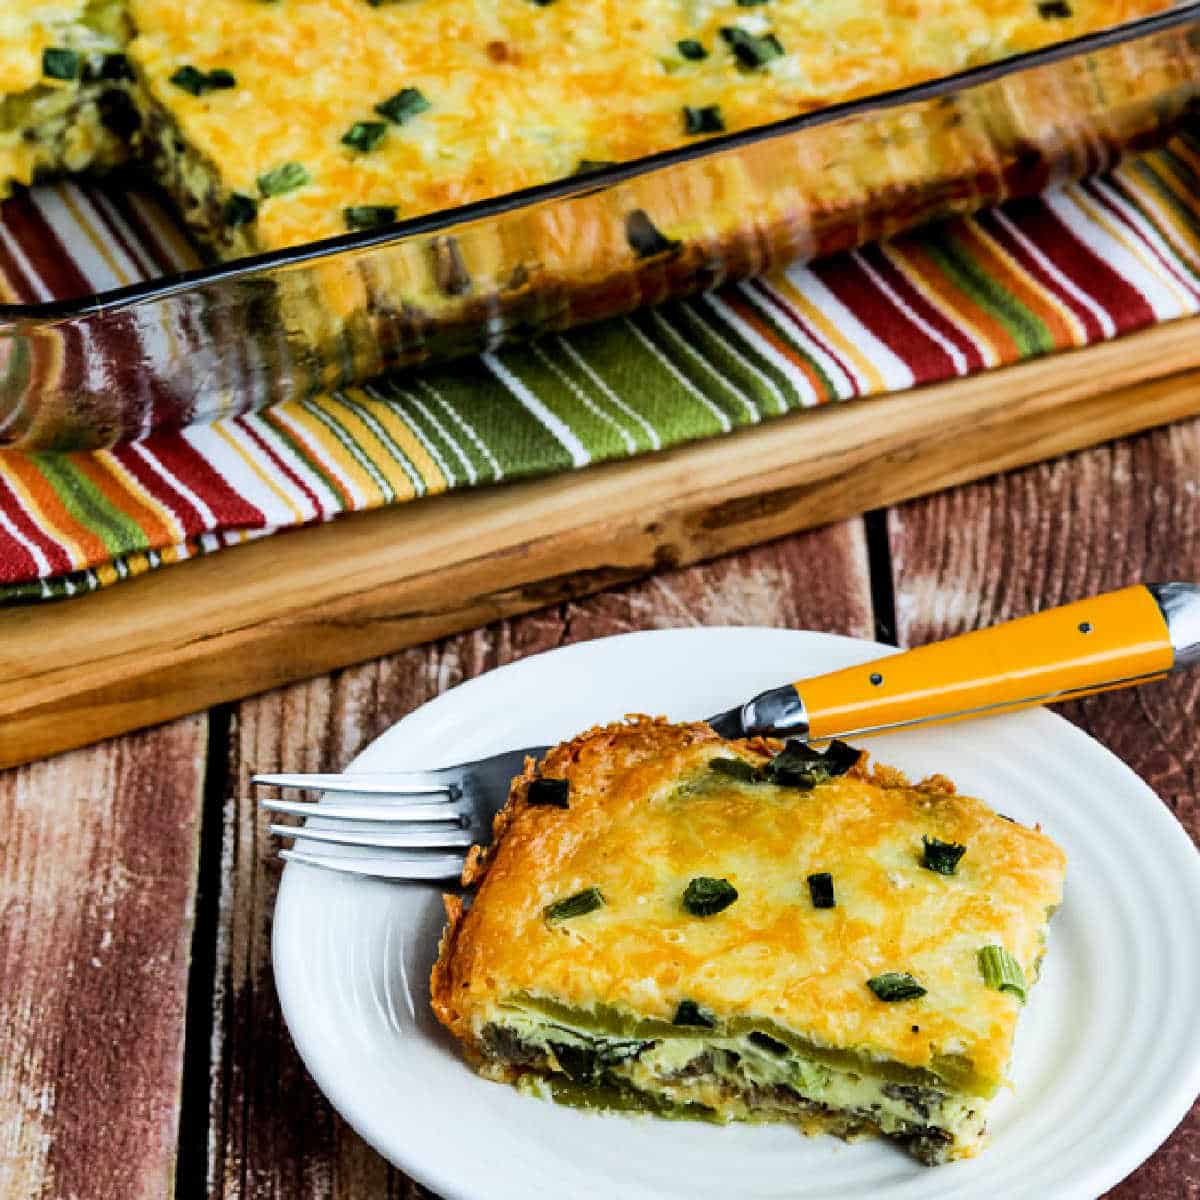 Cheesy Sausage and Green Chile Breakfast Bake shown with one serving in front of casserole dish.